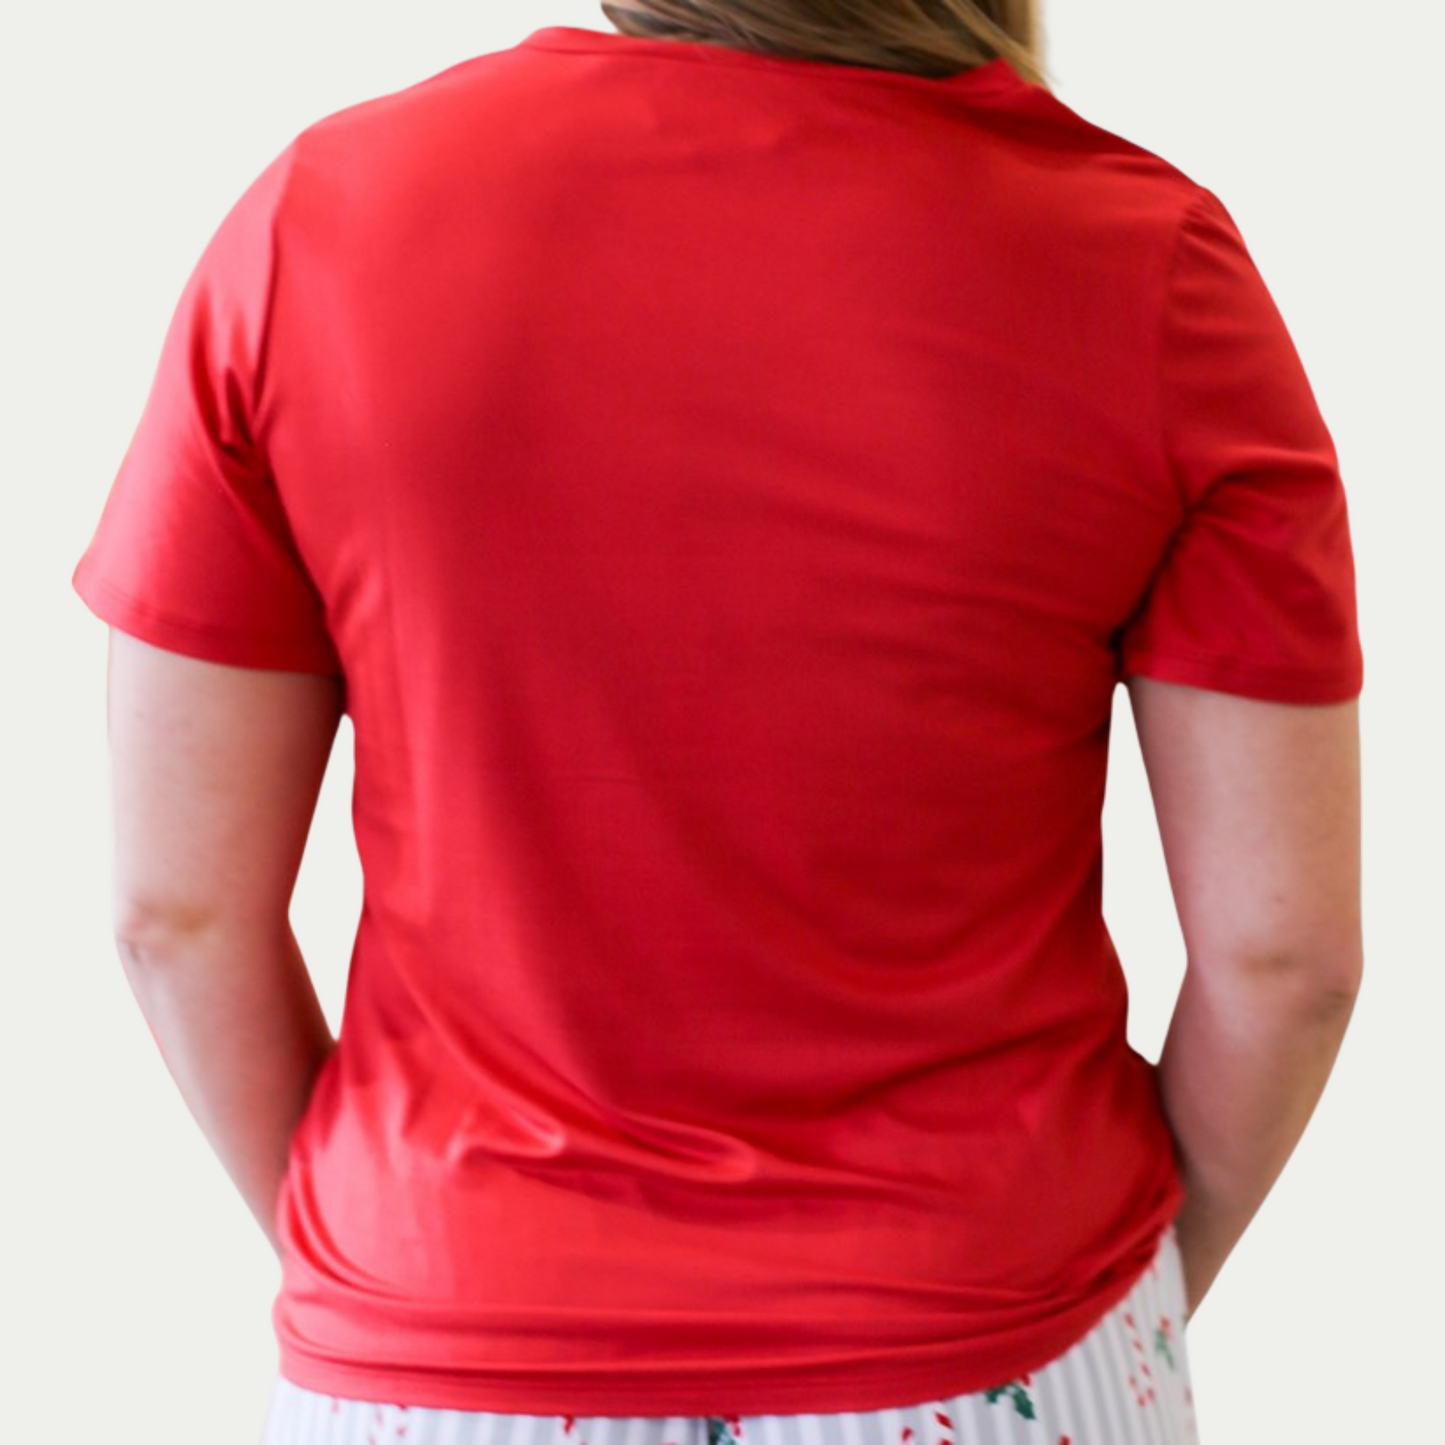 Cheery Red Softest Pocket Tee Ever